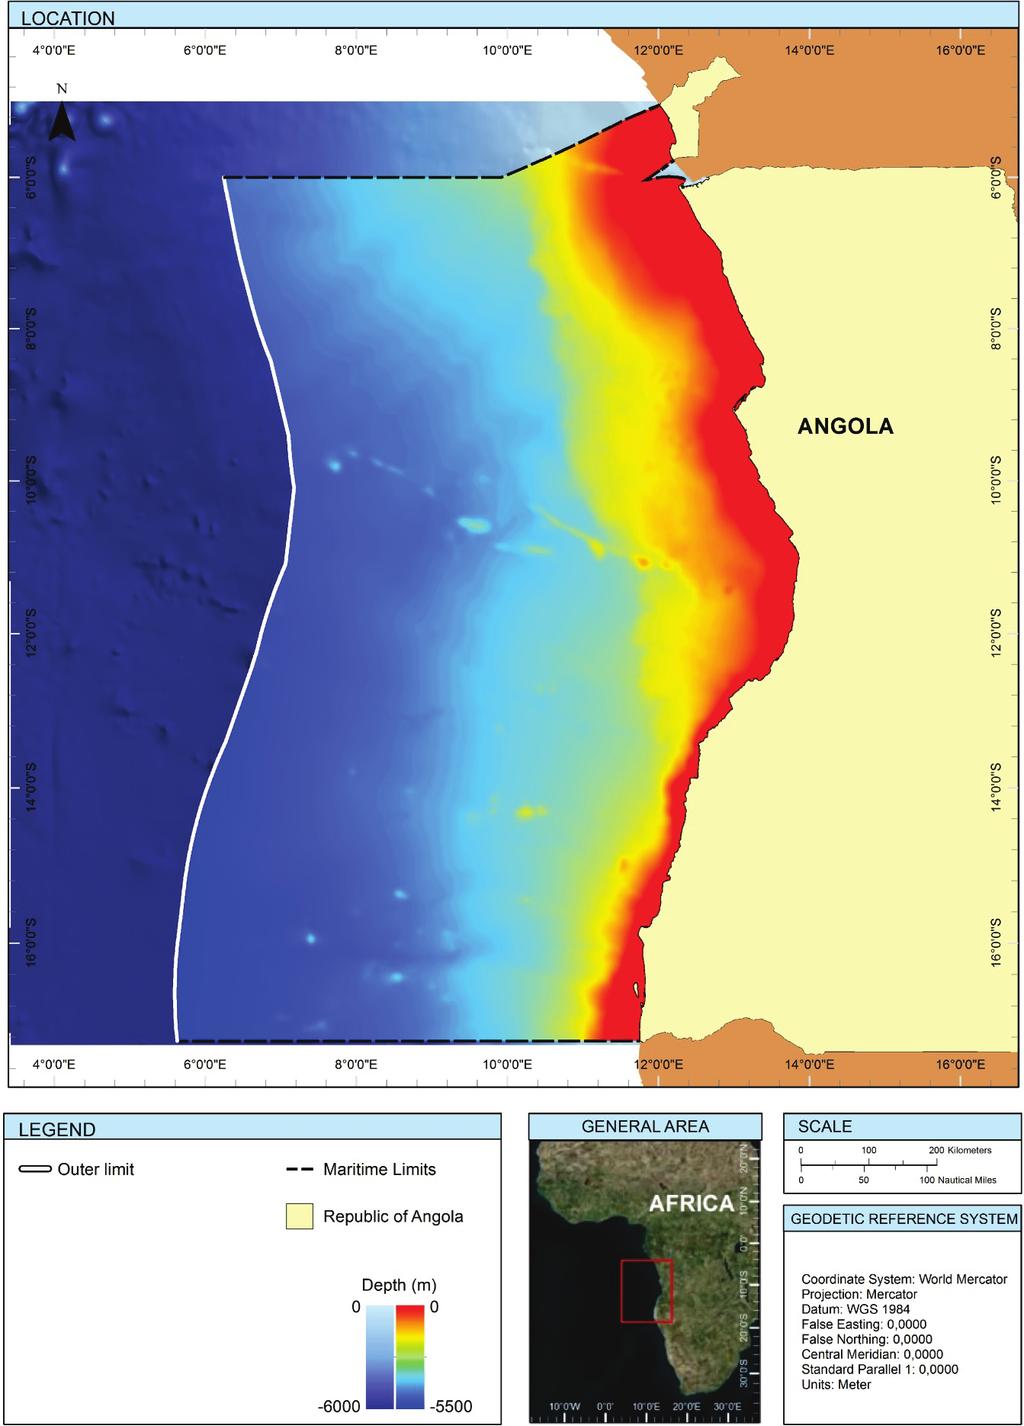 2 Figure 2: The Extended Continental Shelf of Angola.